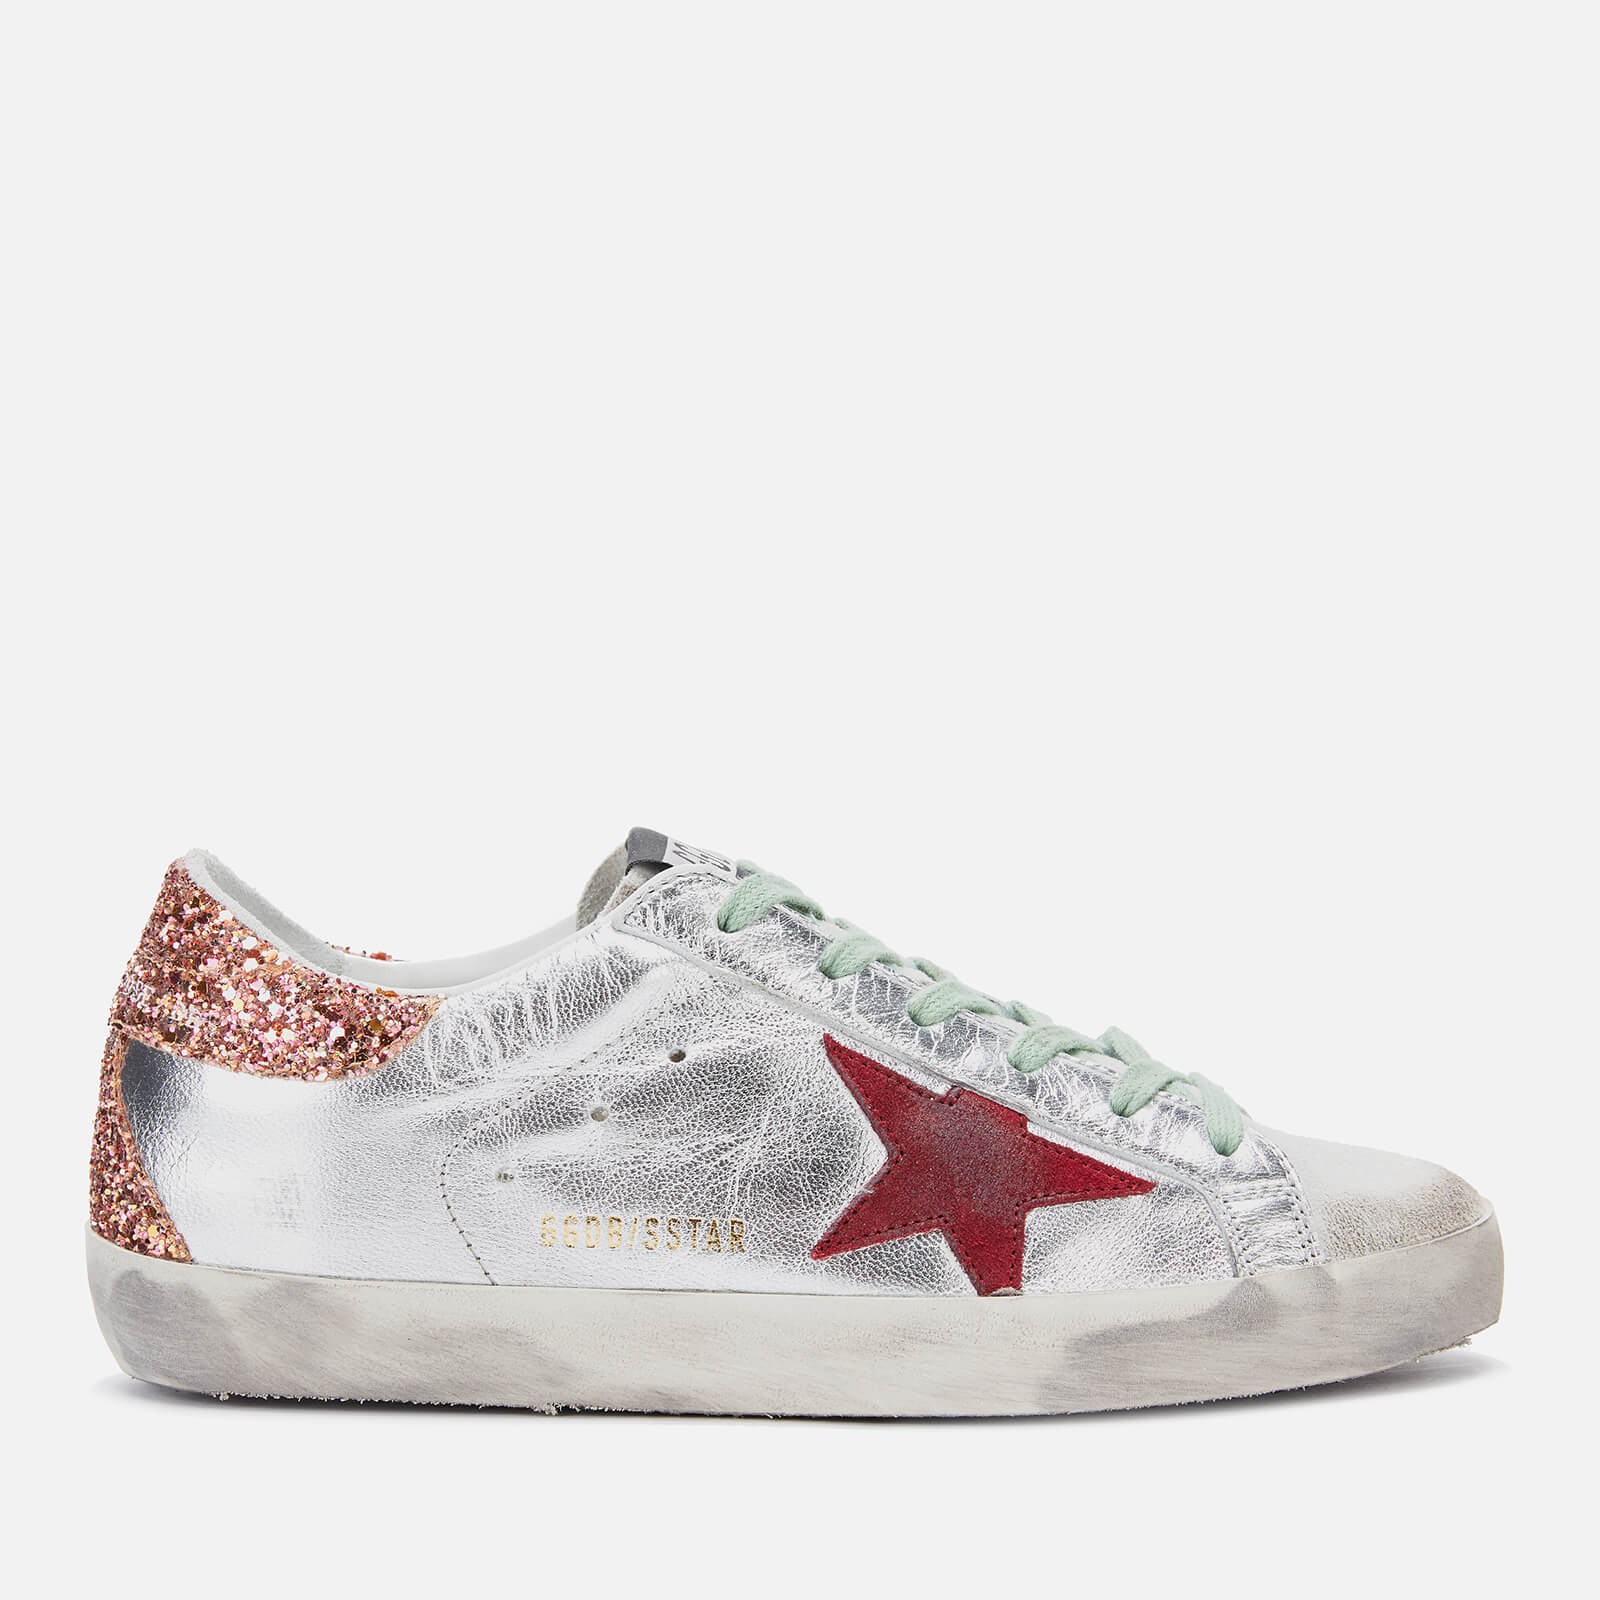 Golden Goose Deluxe Brand Women's Superstar Leather Trainers - Silver/Sparkling Glitter Red